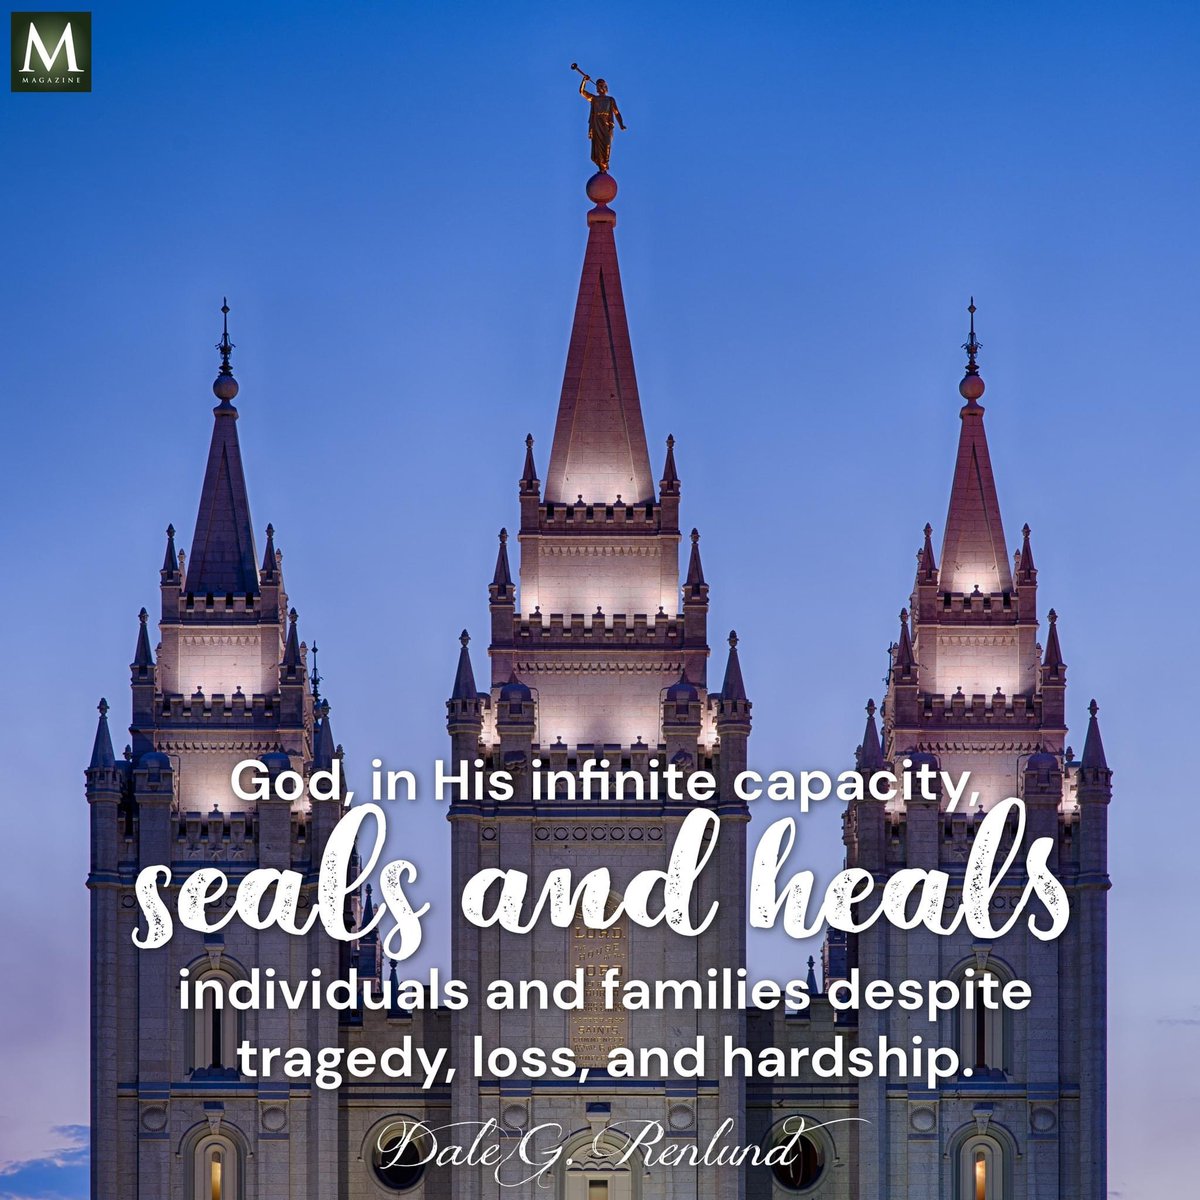 “God, in His infinite capacity, seals and heals individuals and families despite tragedy, loss, and hardship.” ~ Elder Dale G. Renlund 

#LDSTemples #EternalLife #HearHim #ShareGoodness #TrustGod #FamiliesCanBeForever #TheChurchOfJesusChristOfLatterDaySaints